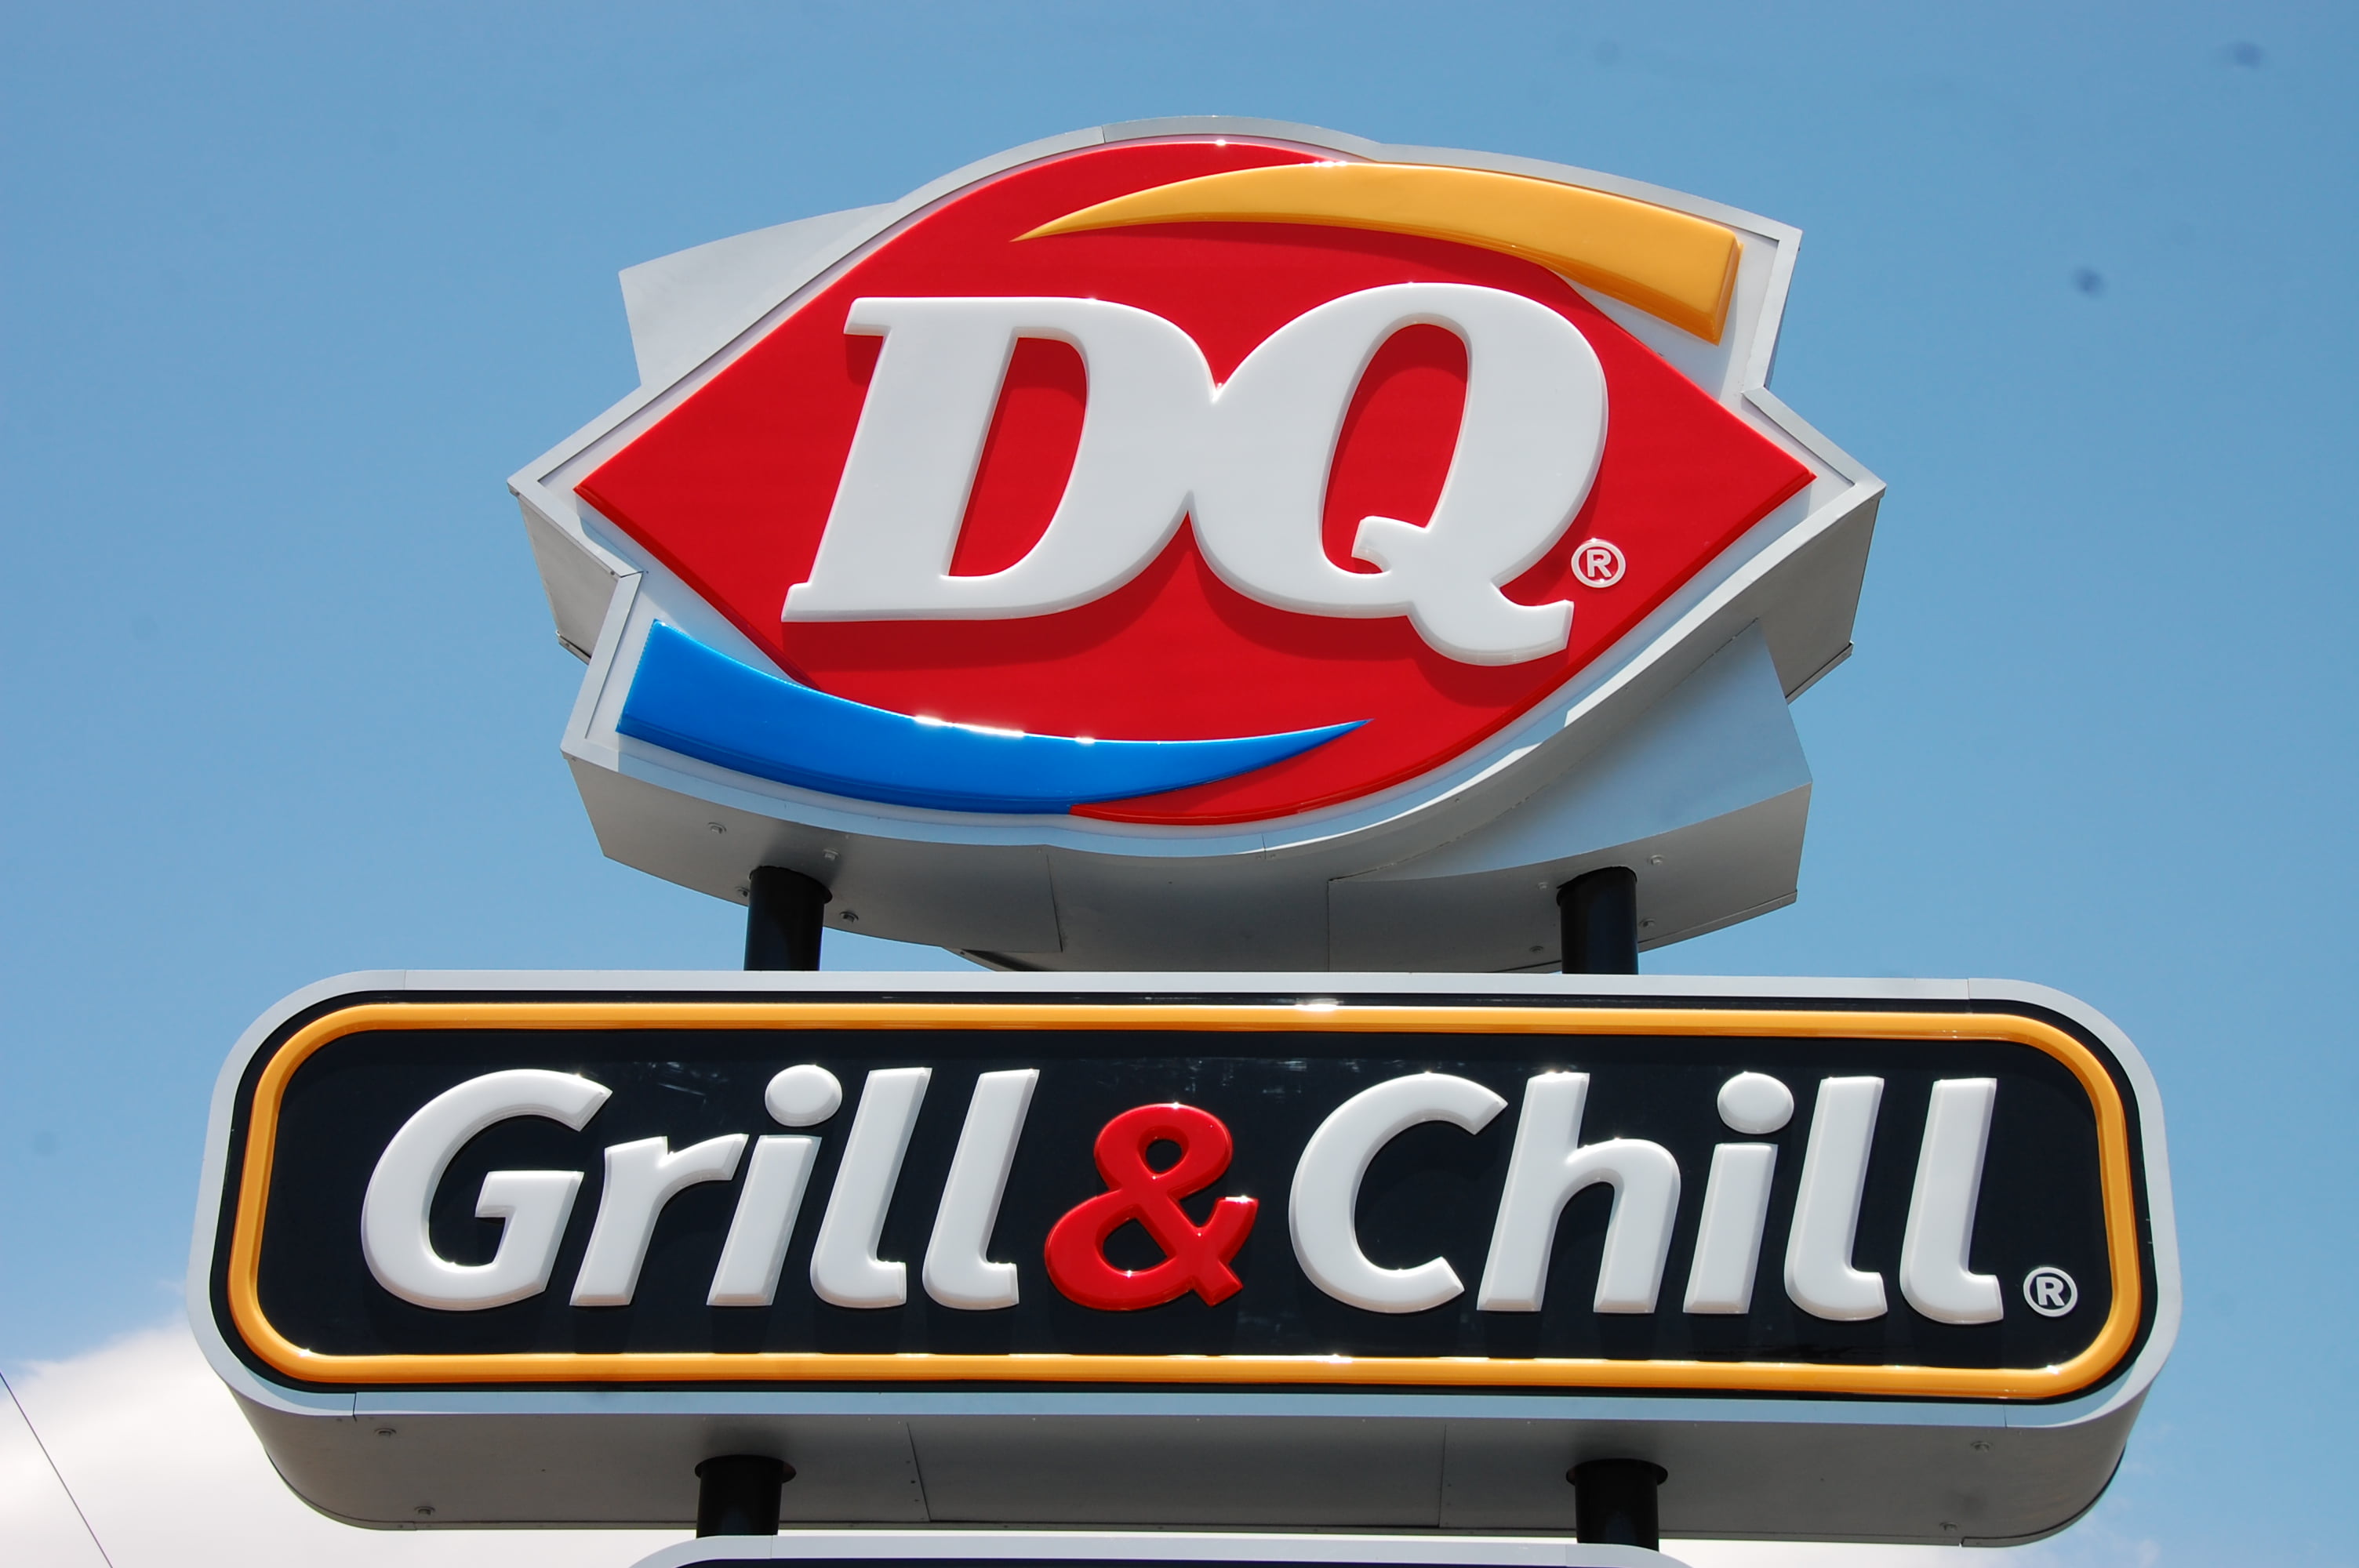 DQ grill and chill signage HD wallpaper | Wallpaper Flare